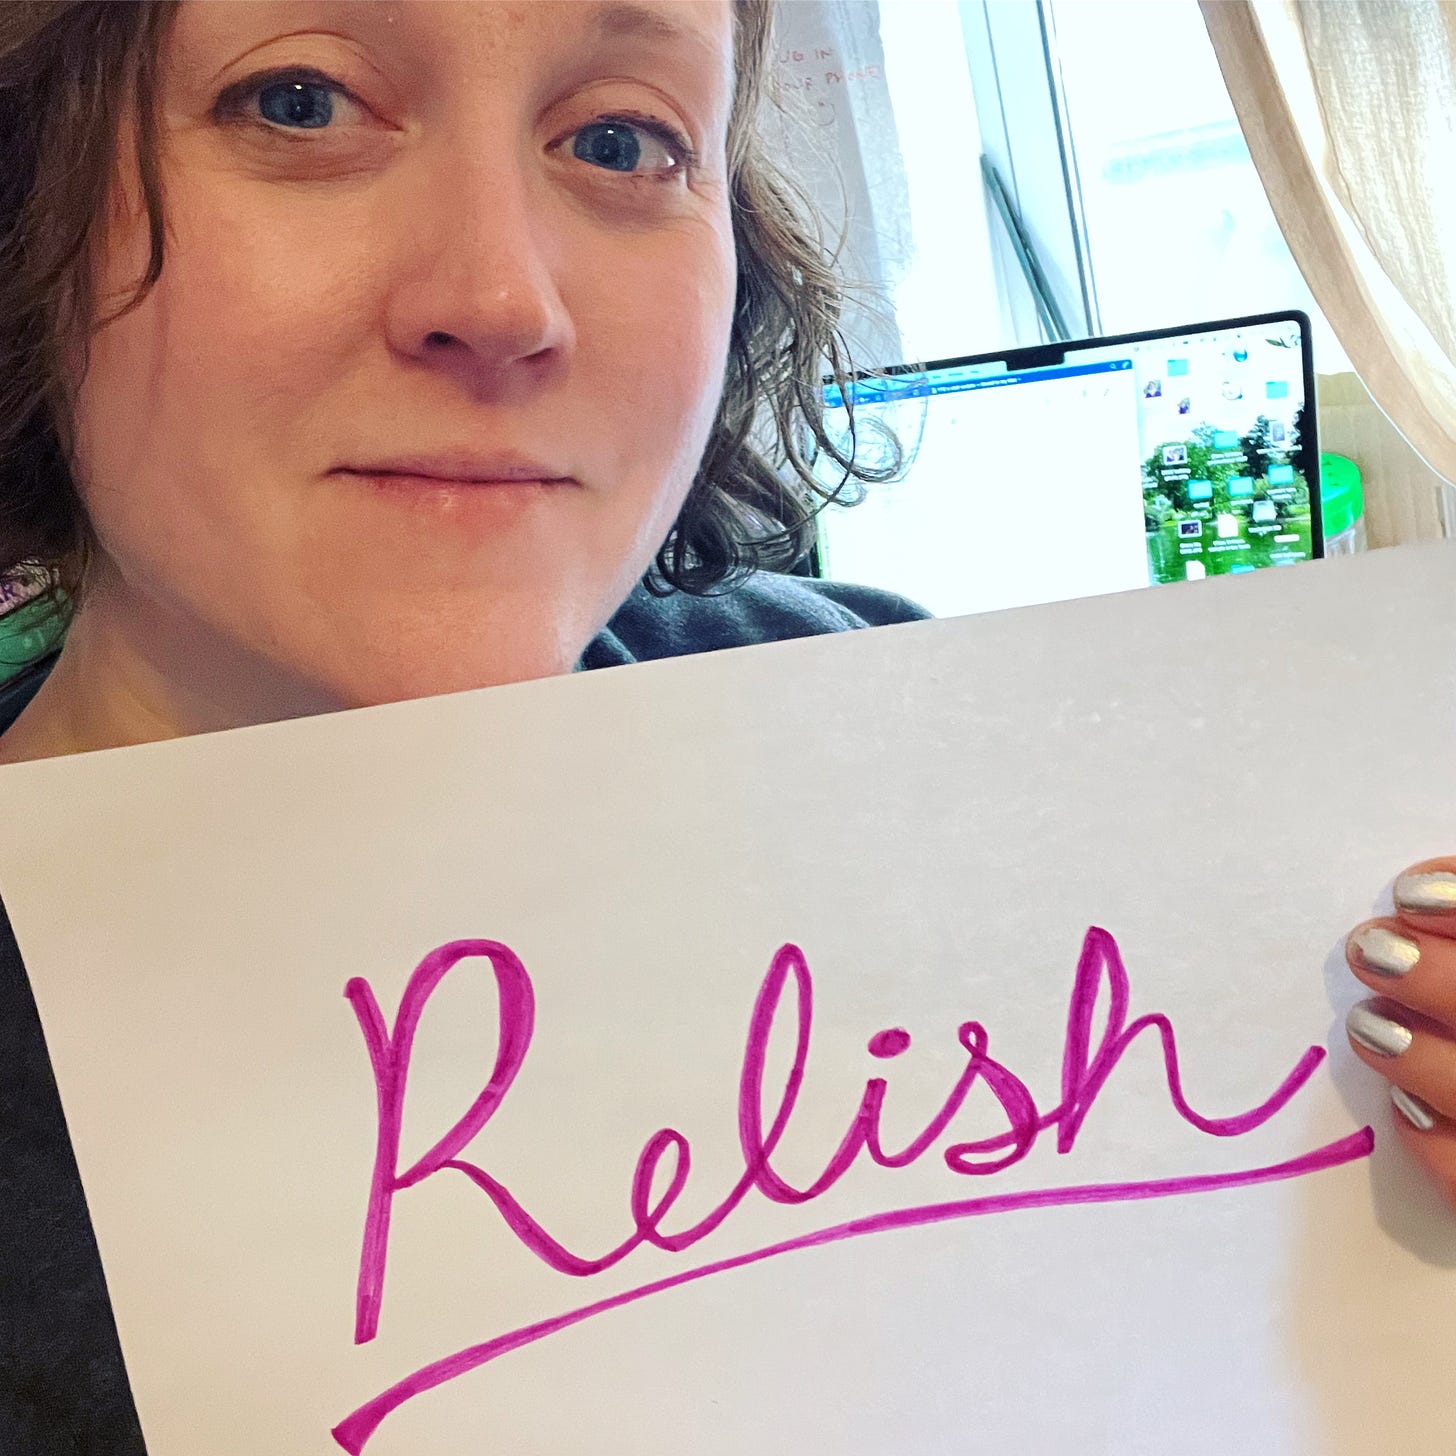 me holding a hand-written sign reading "relish" in purple cursive